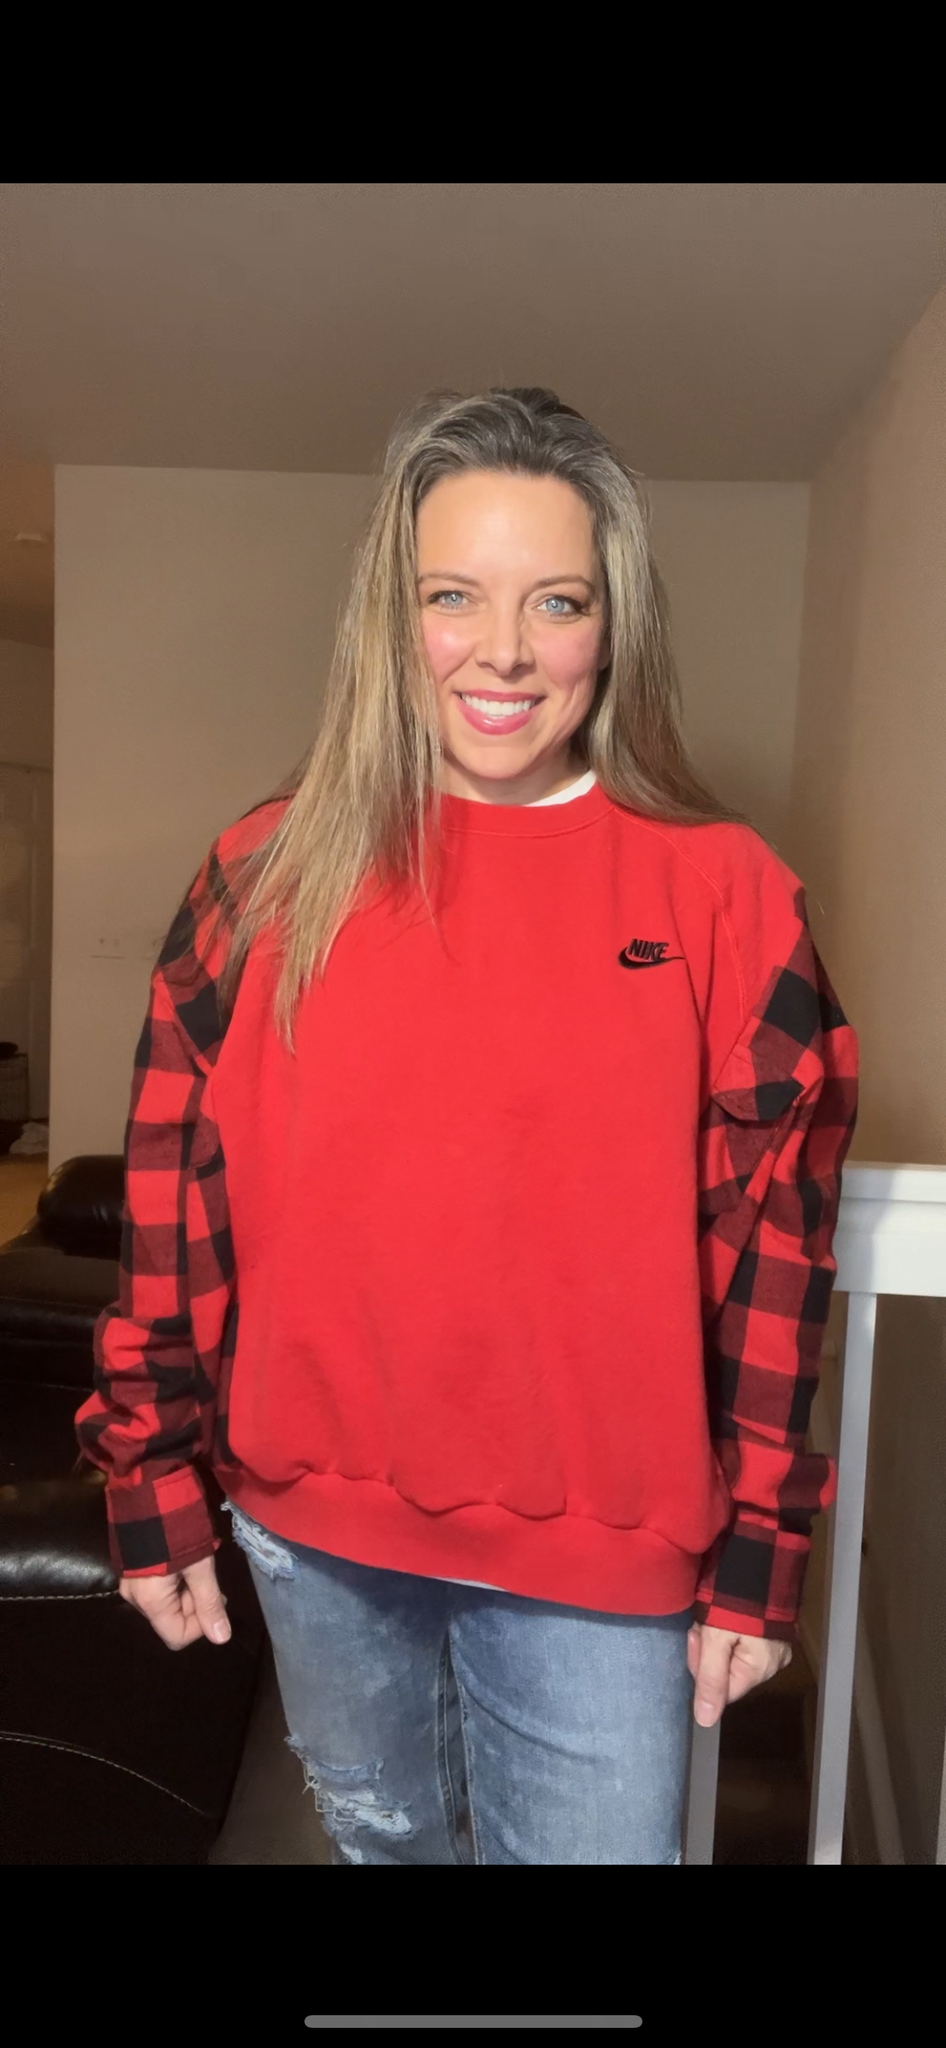 Upcycled Red Nike - Women’s medium/large – middleweight sweatshirt with flannel sleeves￼